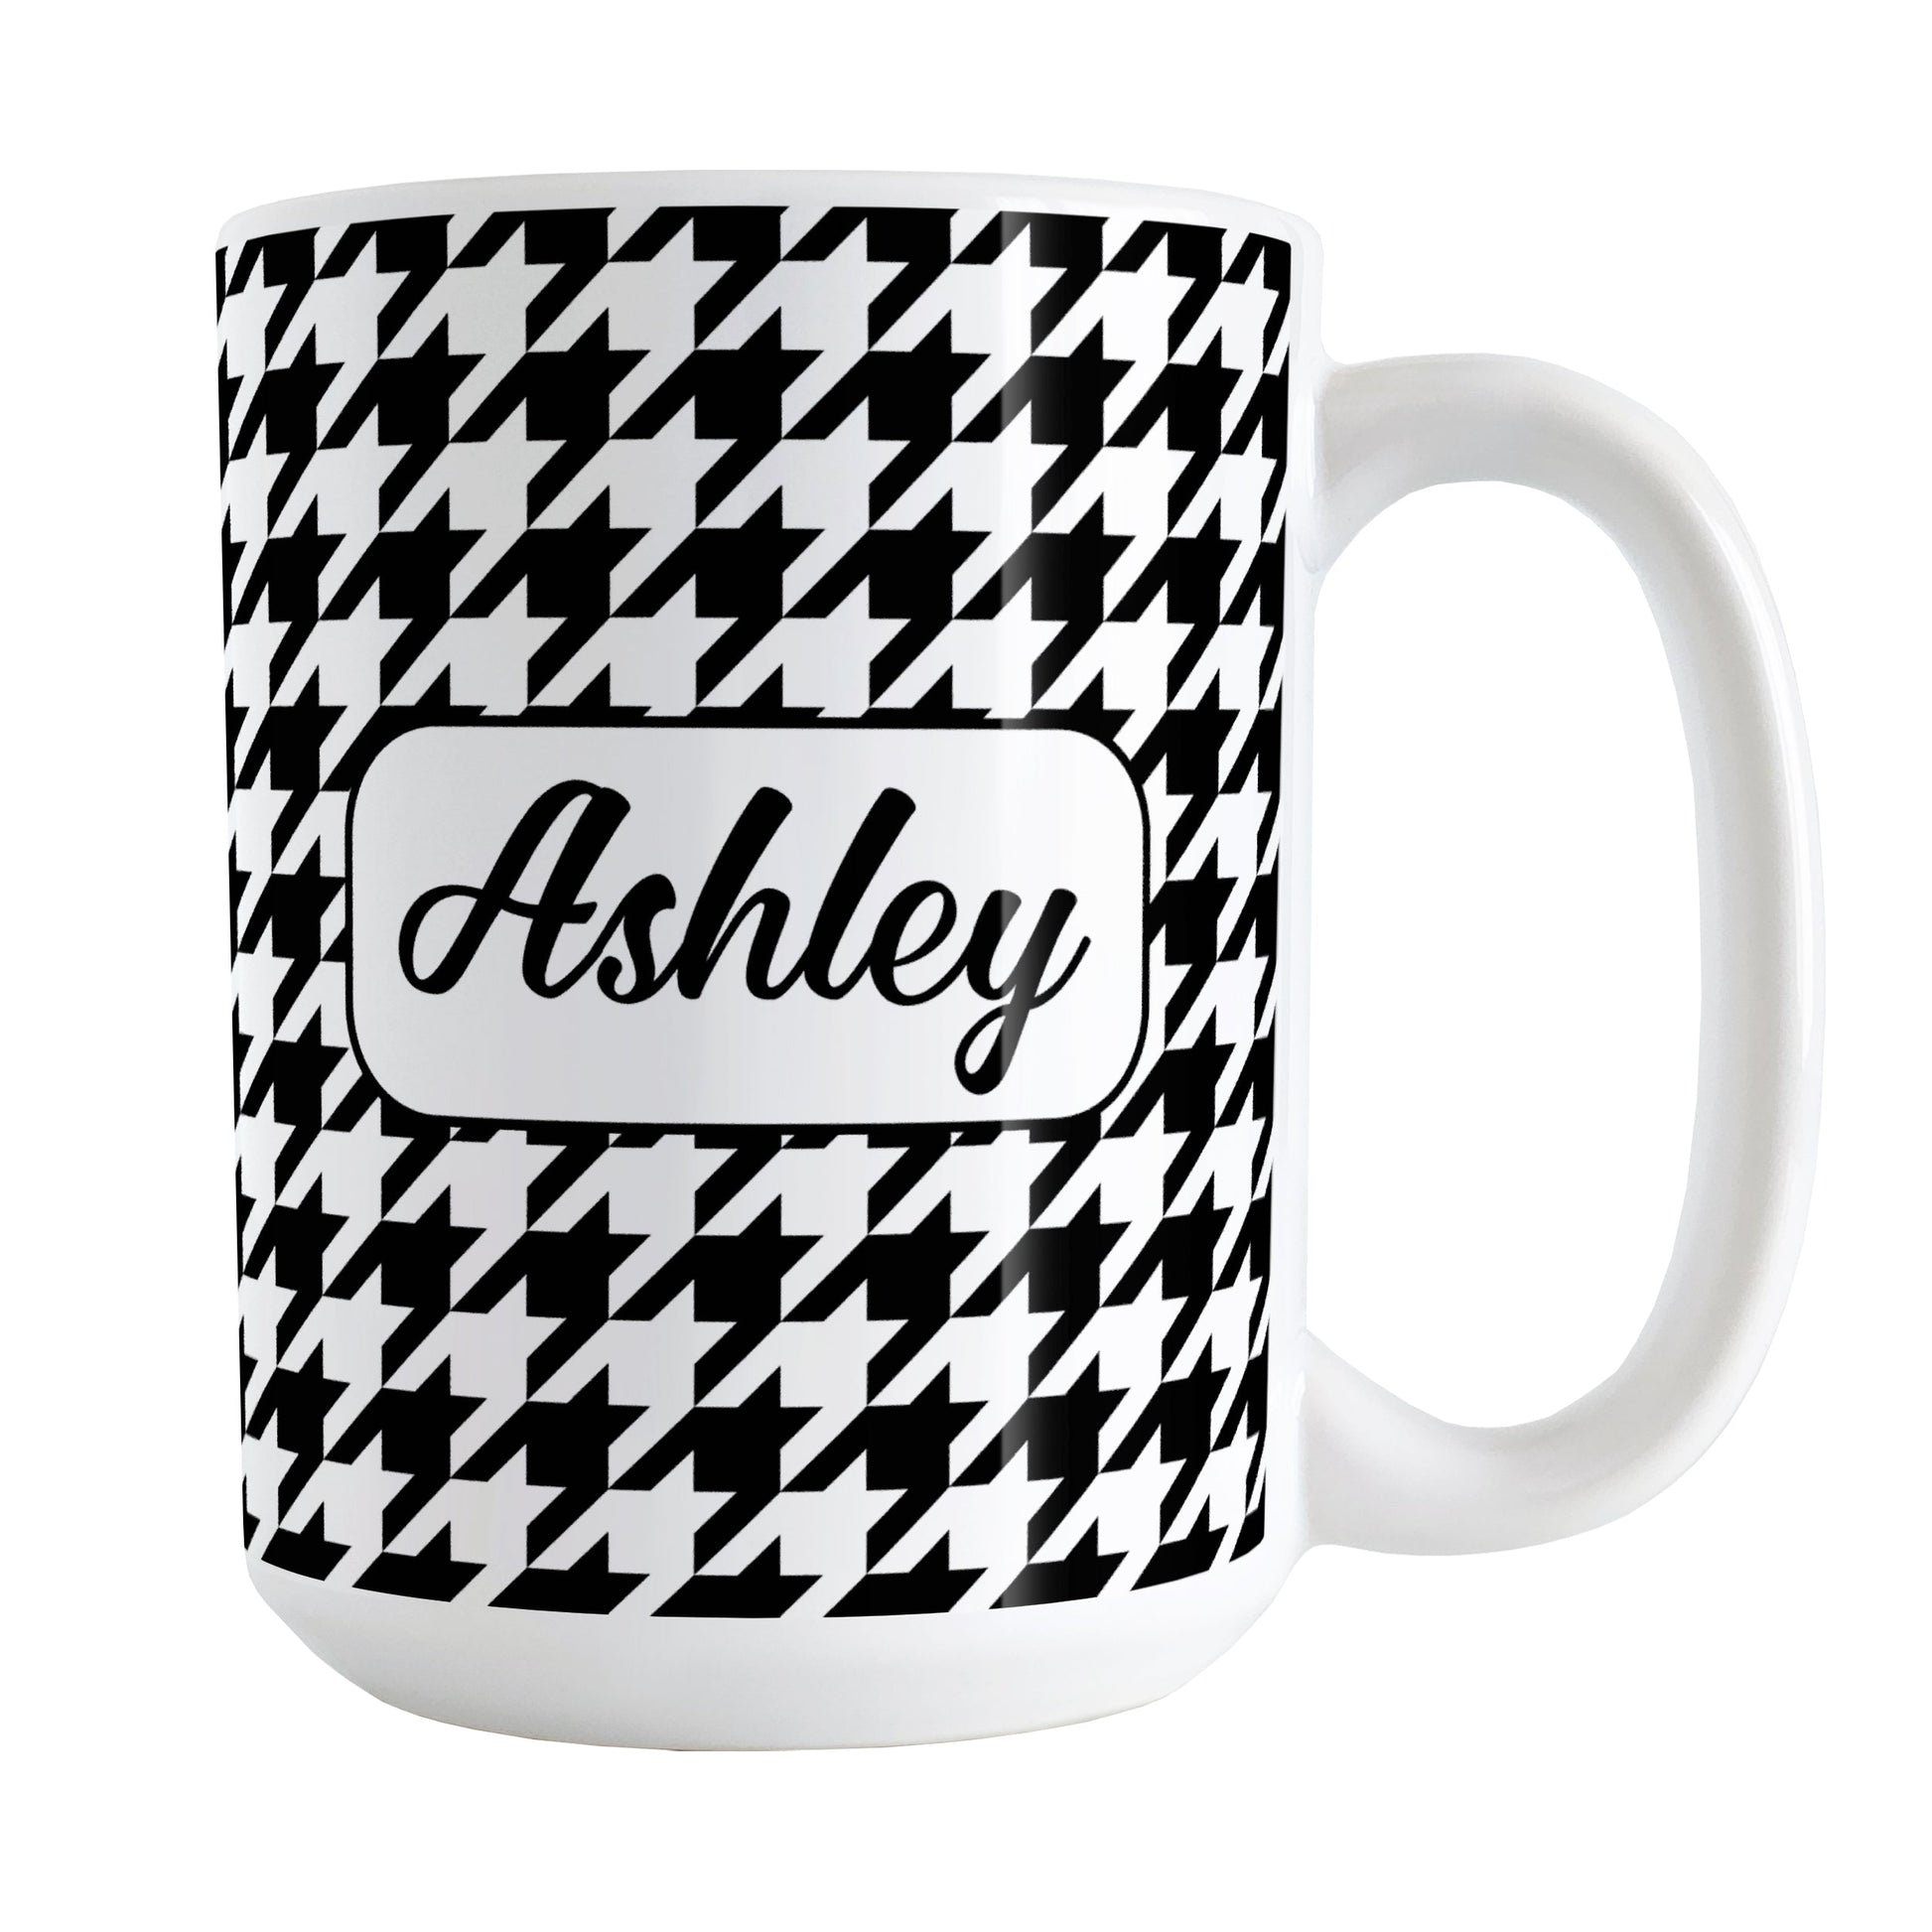 Personalized Black and White Houndstooth Mug (15oz) at Amy's Coffee Mugs